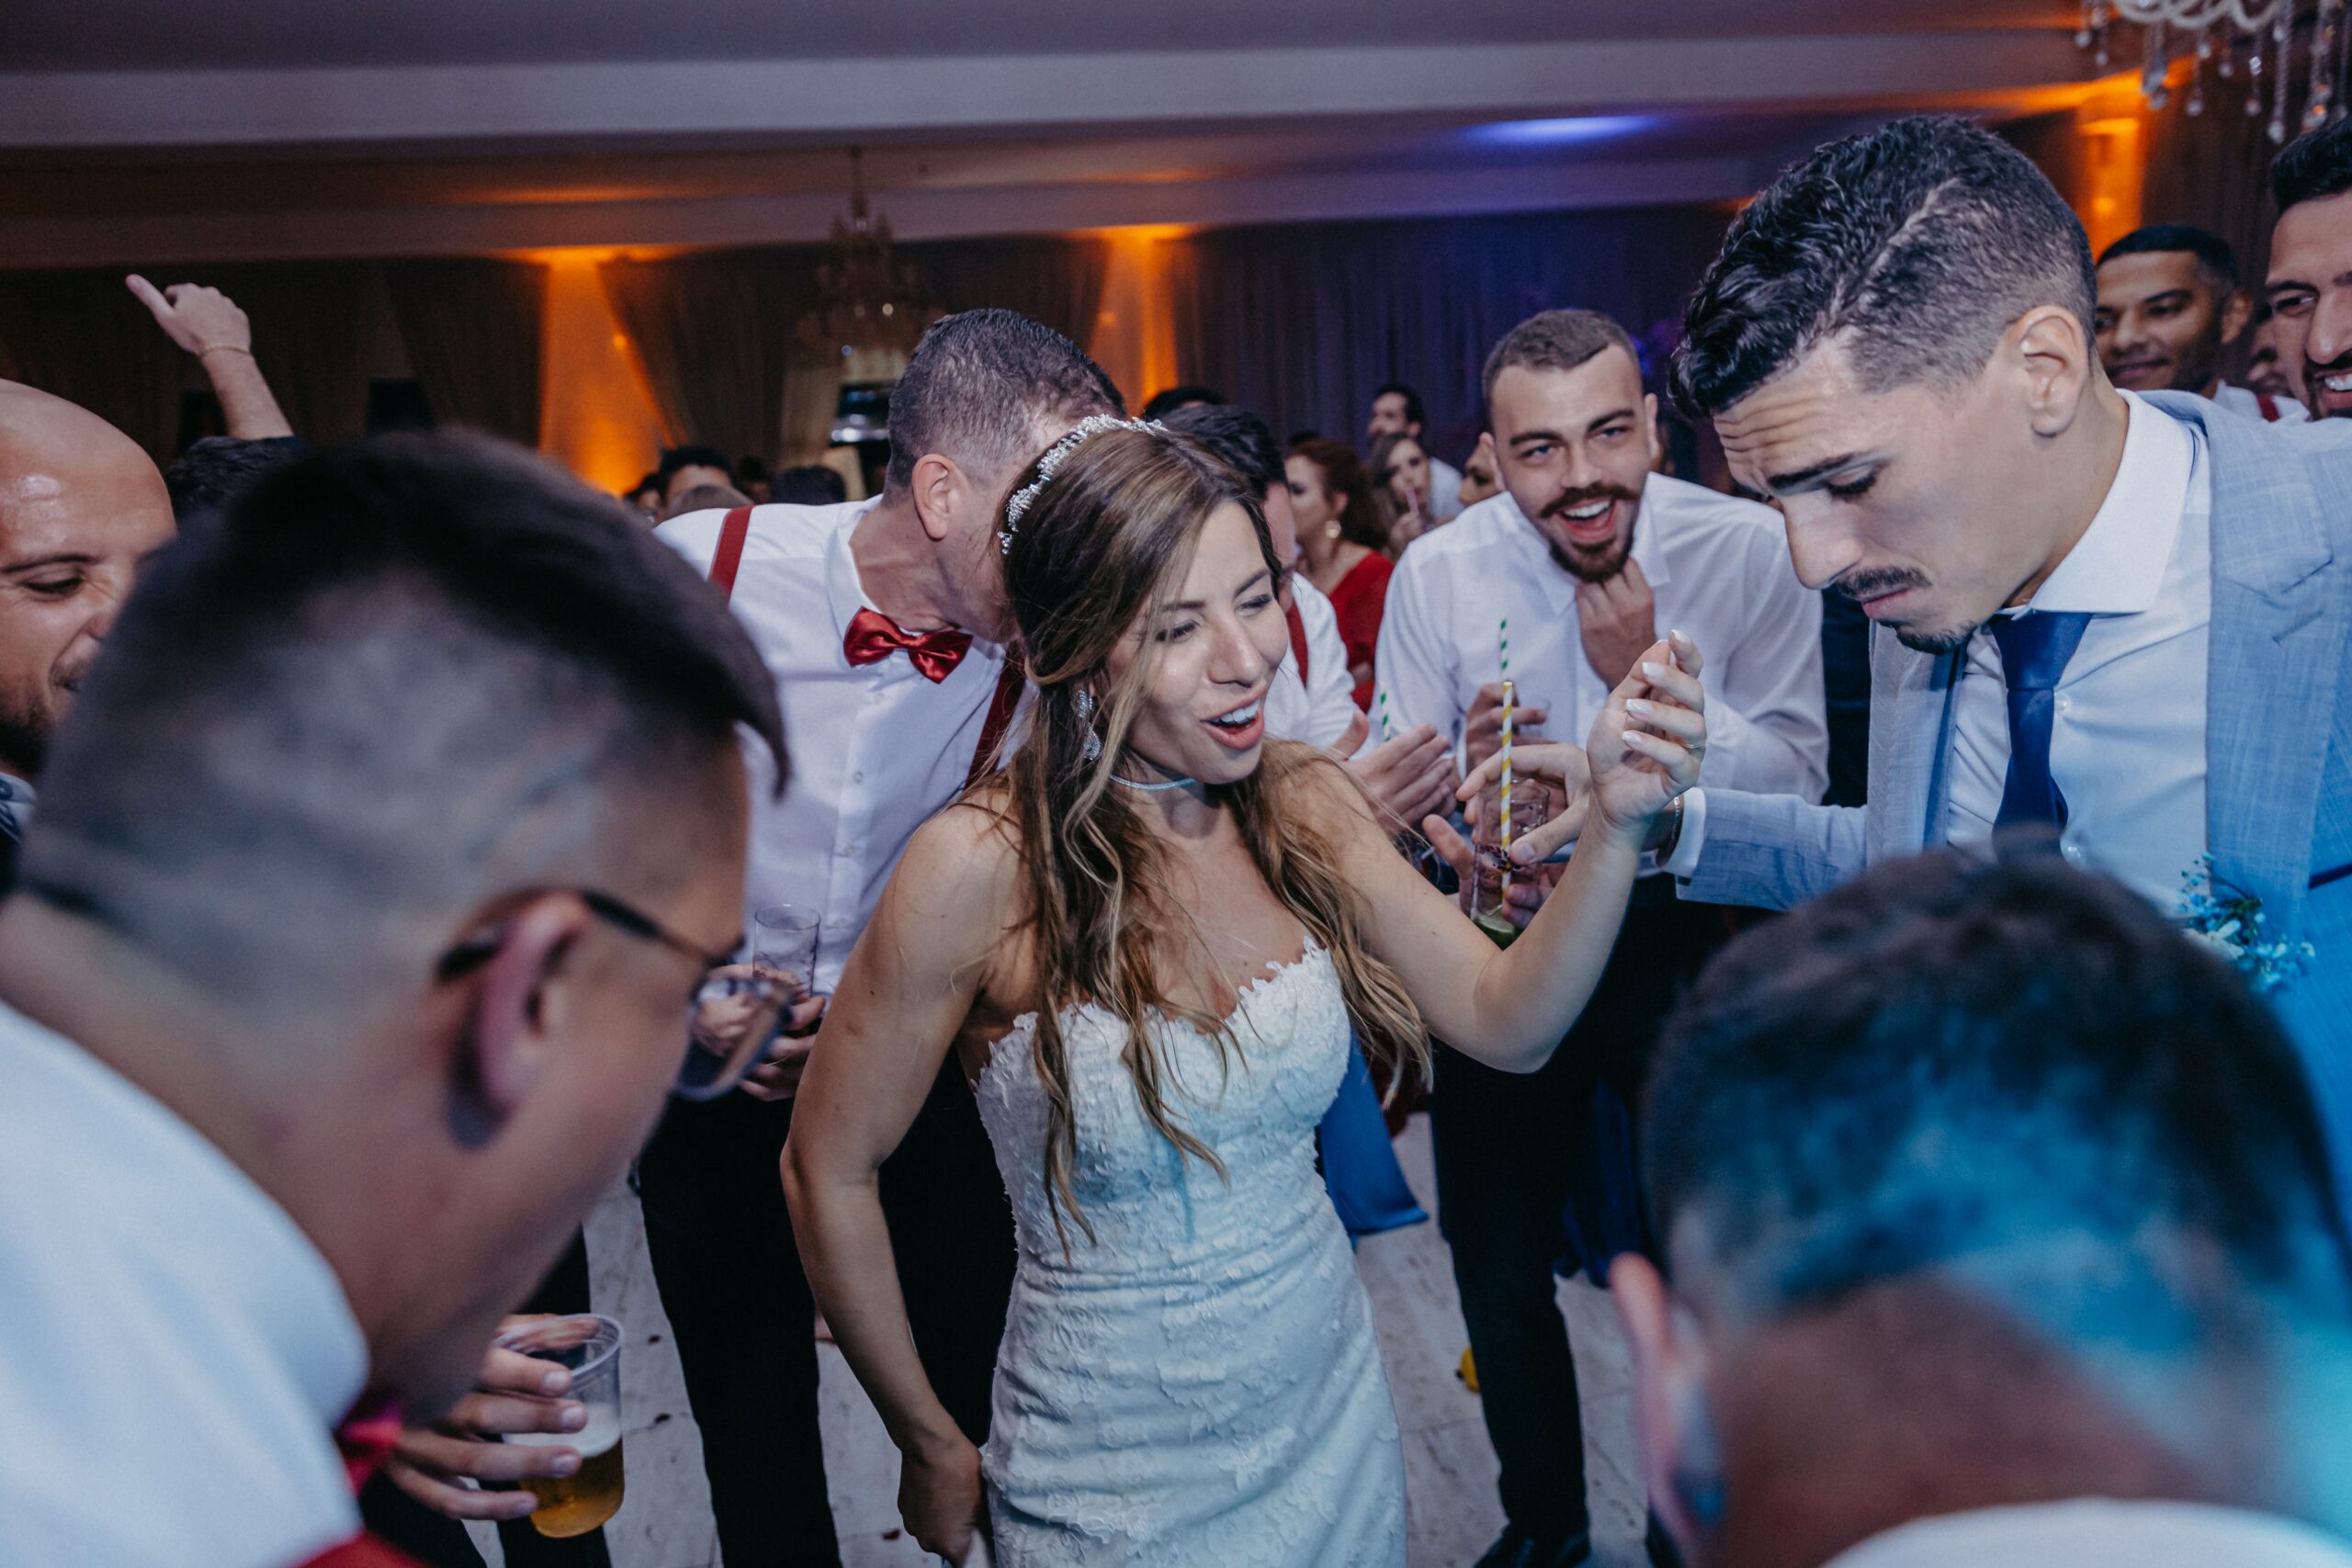 A group dances at a wedding with the bride and groom in the middle.